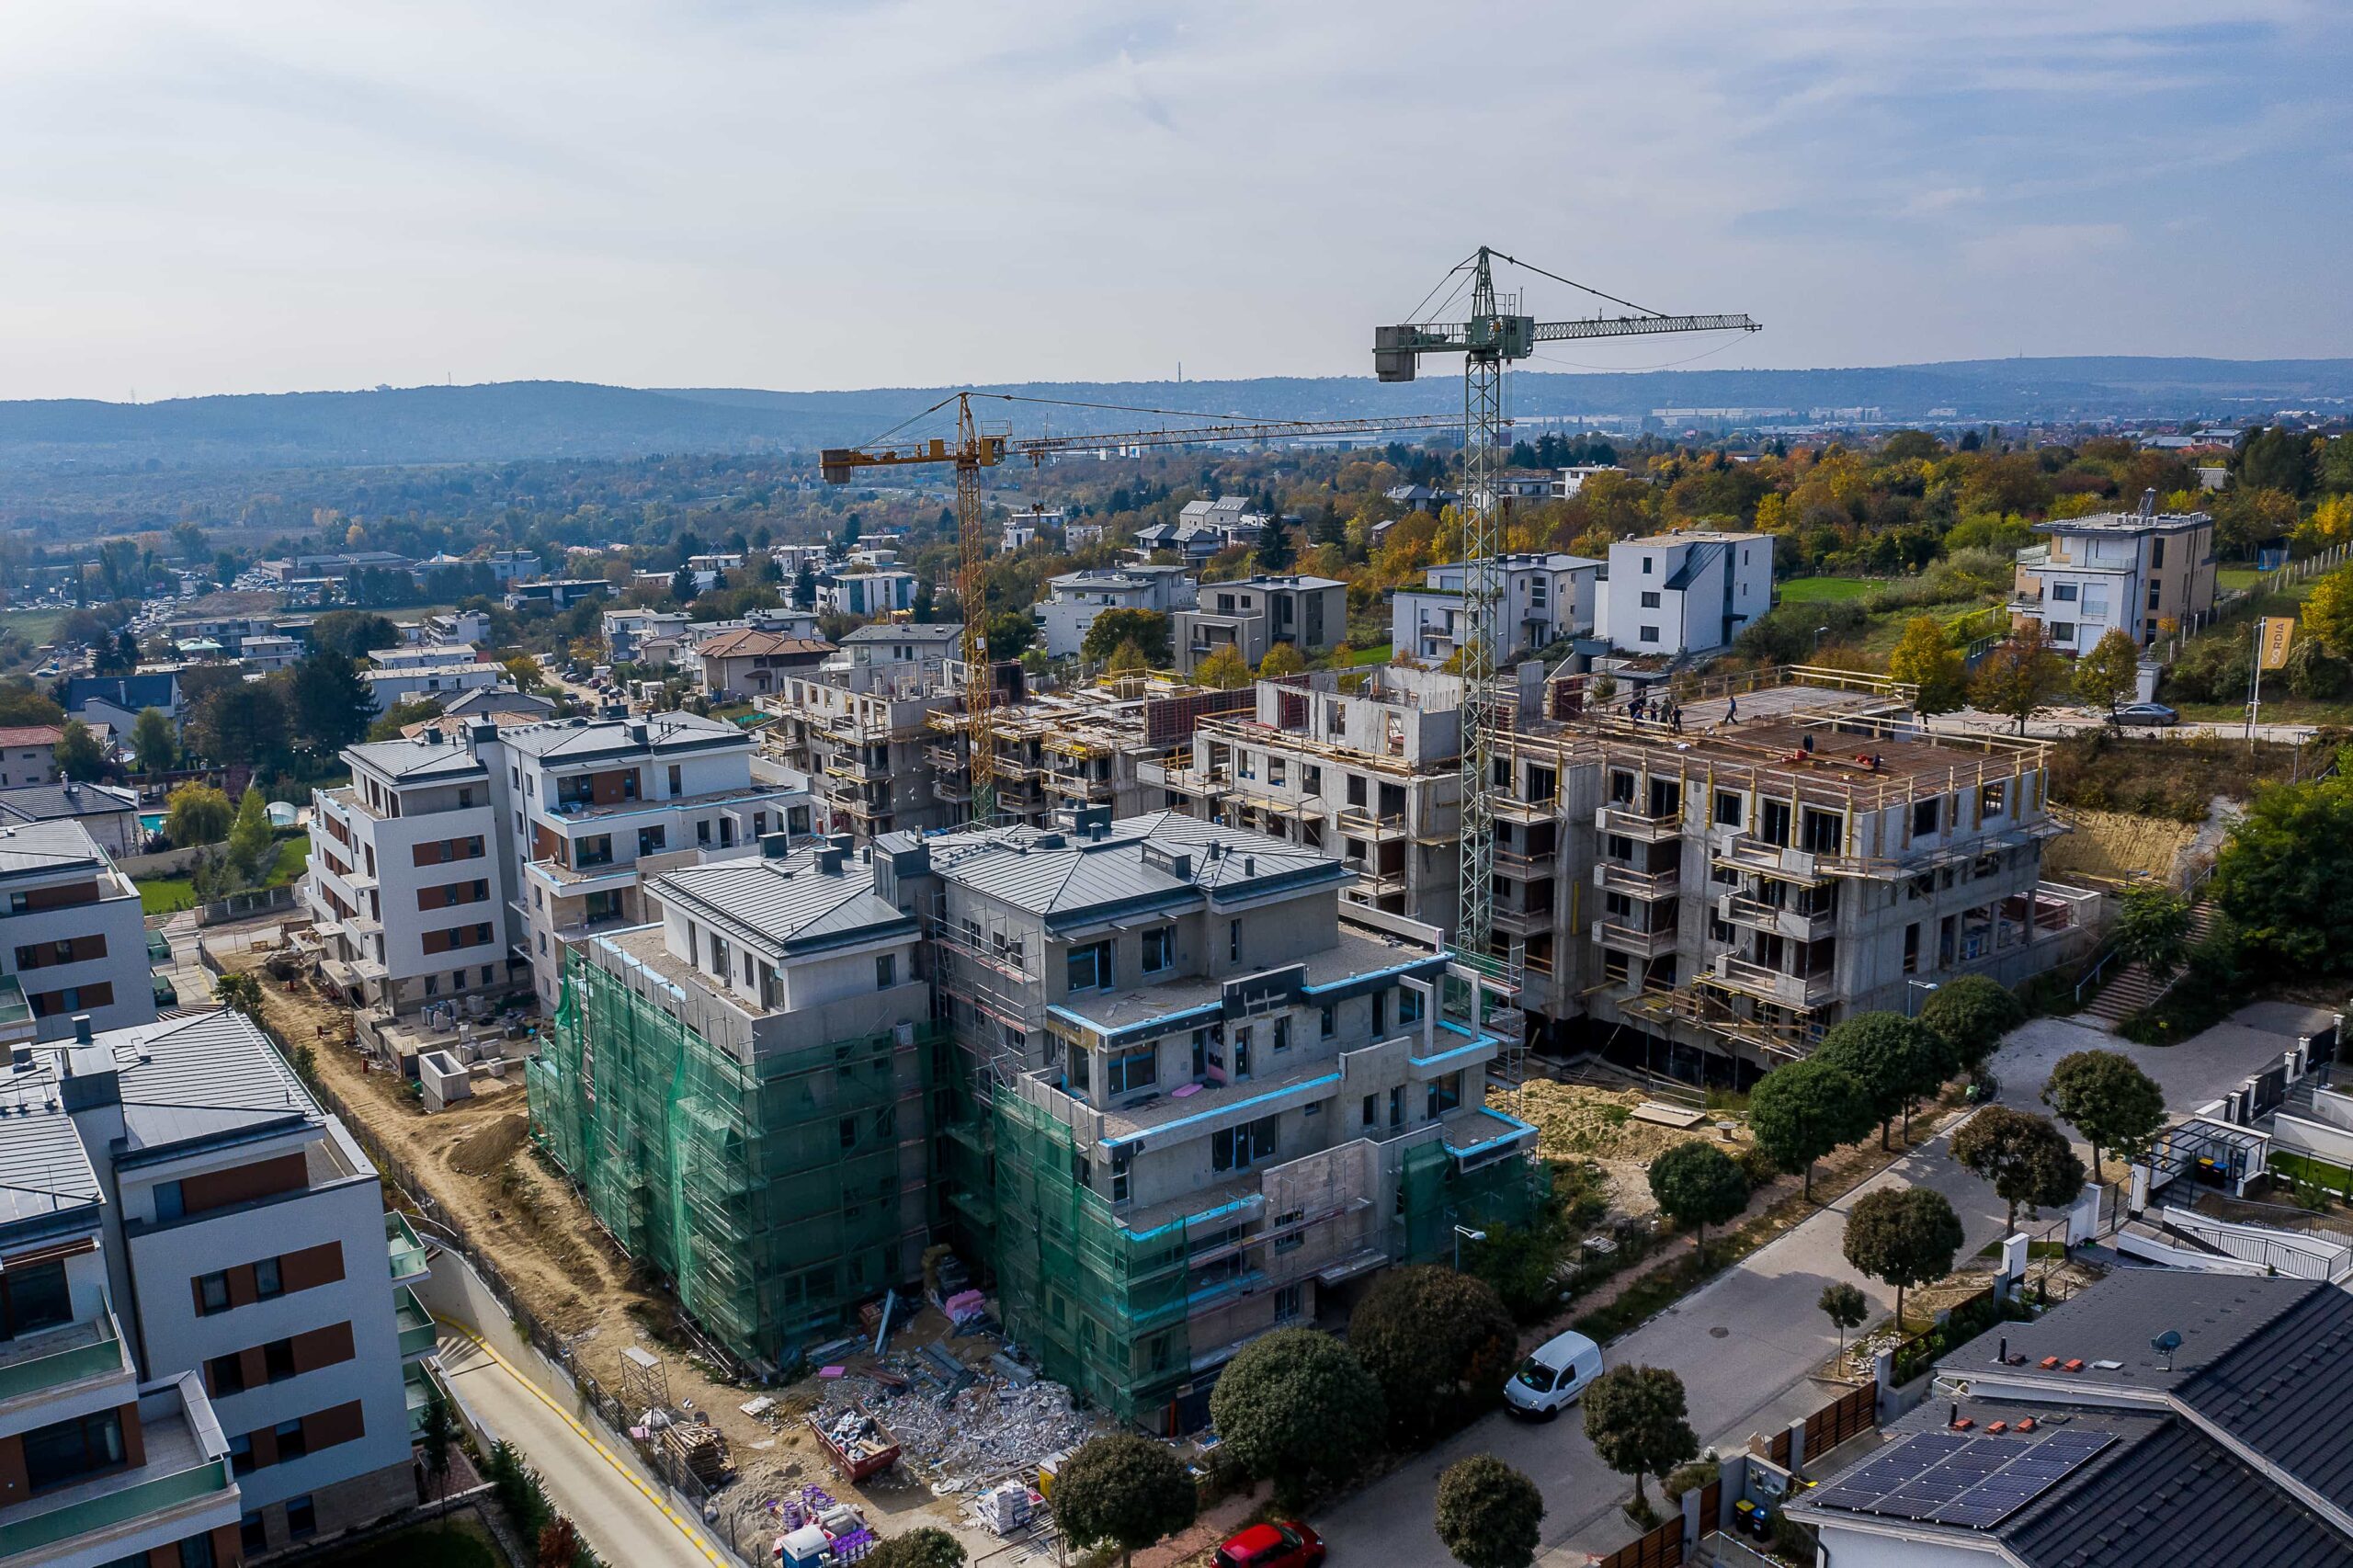 Terrace Residence 4th phase - October 2019